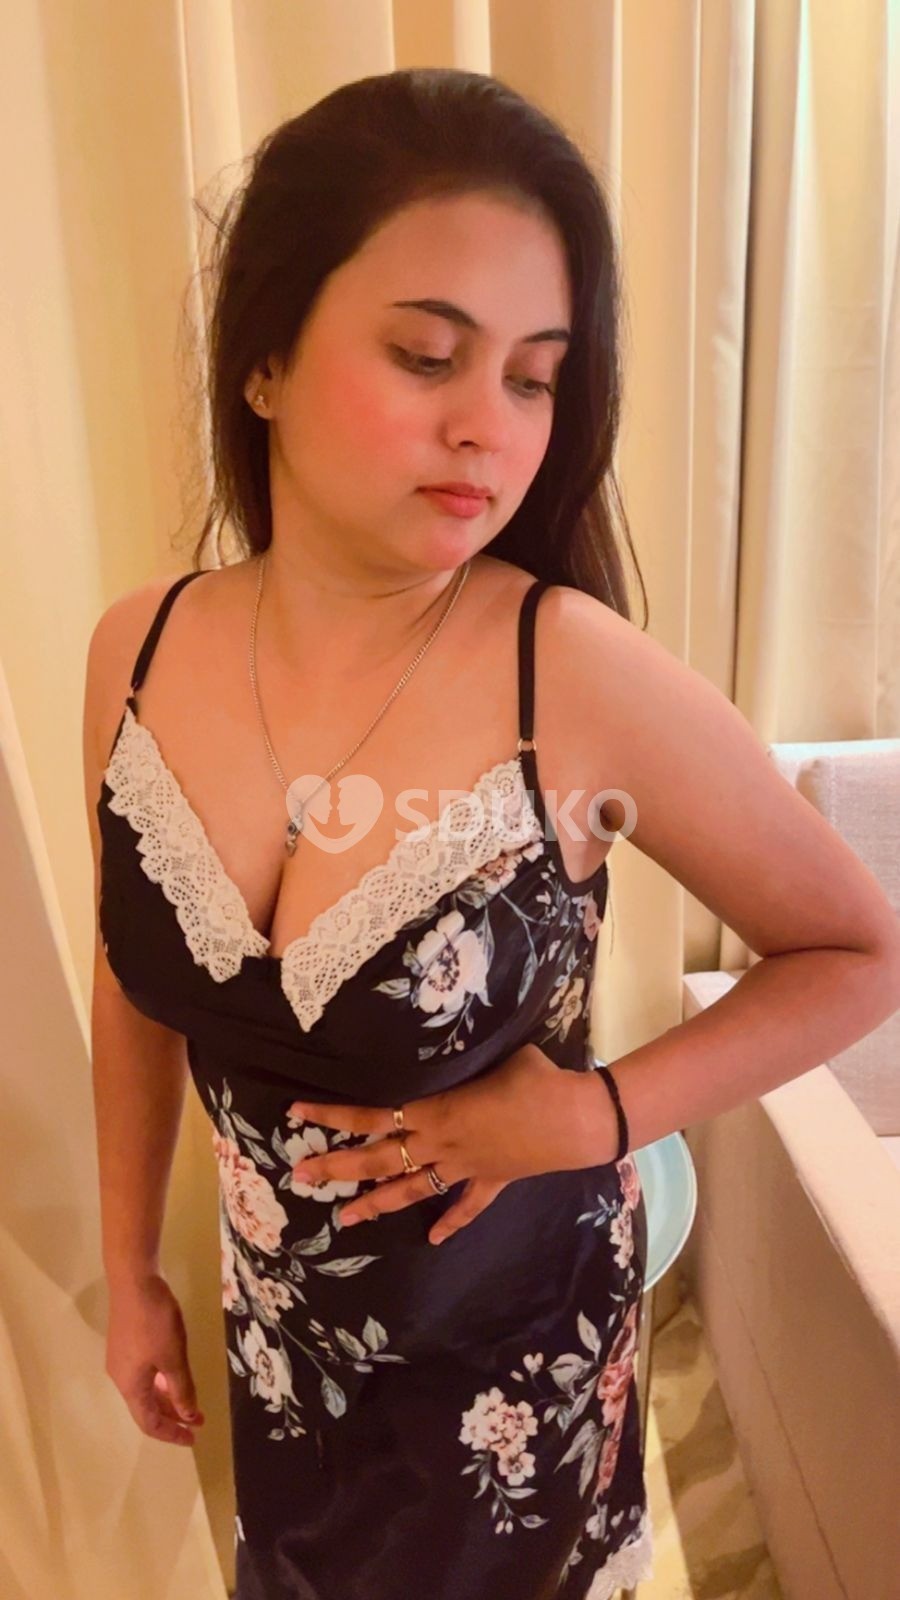 Bhiwadi myself Monika top models and college girls available About me